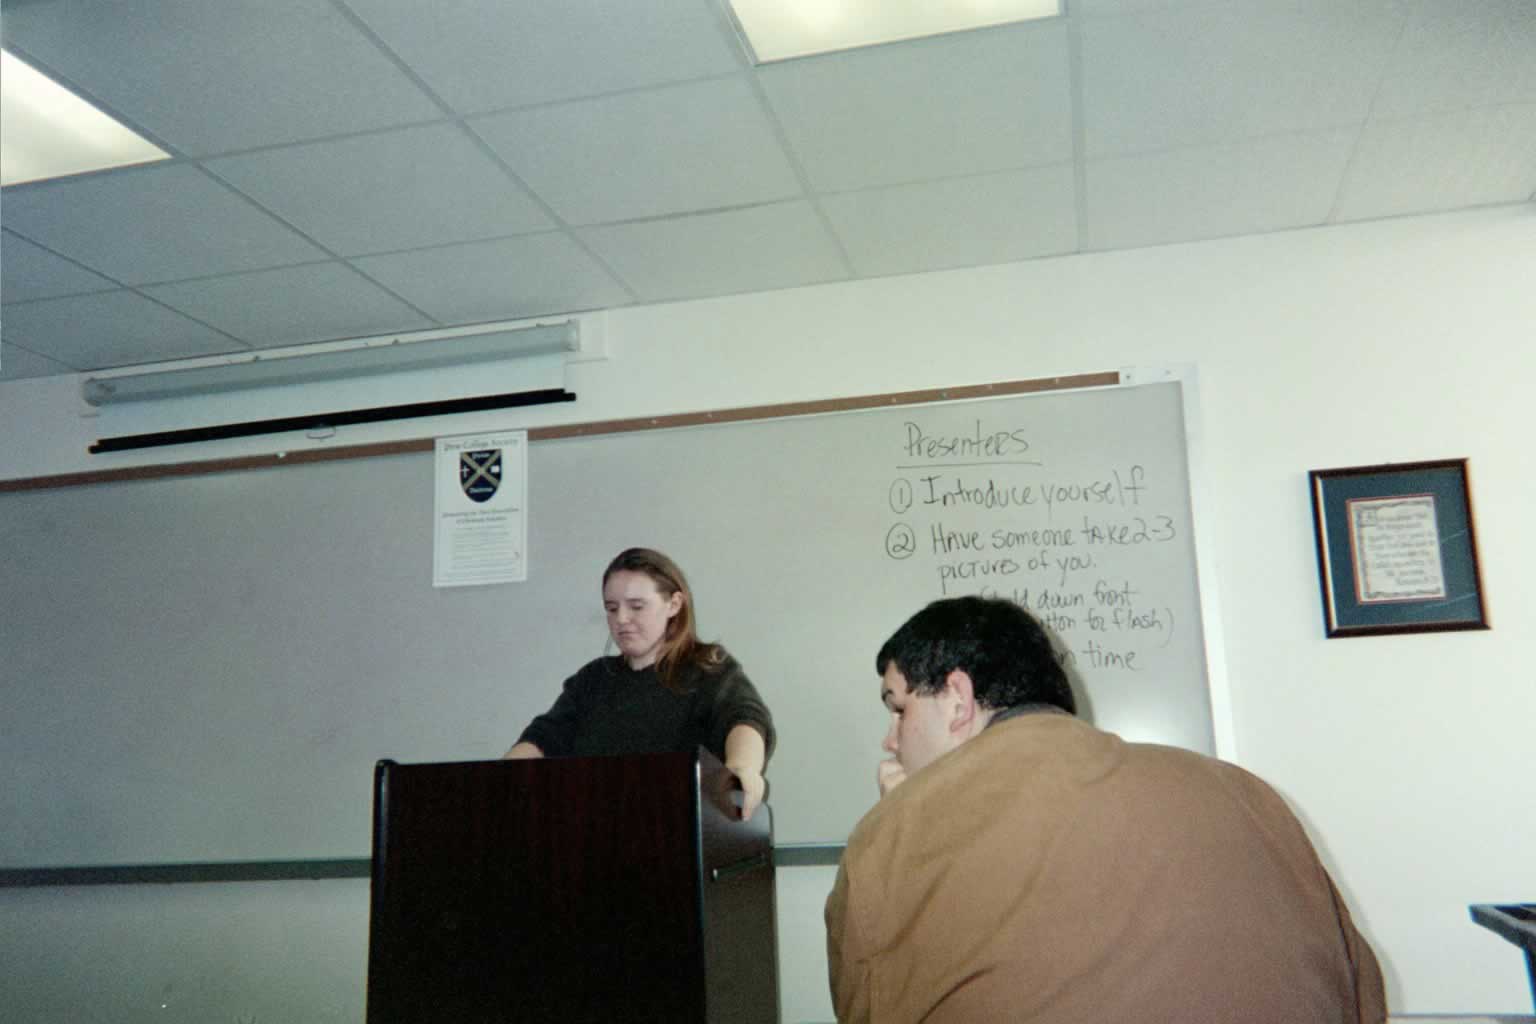 picture of a woman standing behind a podium speaking